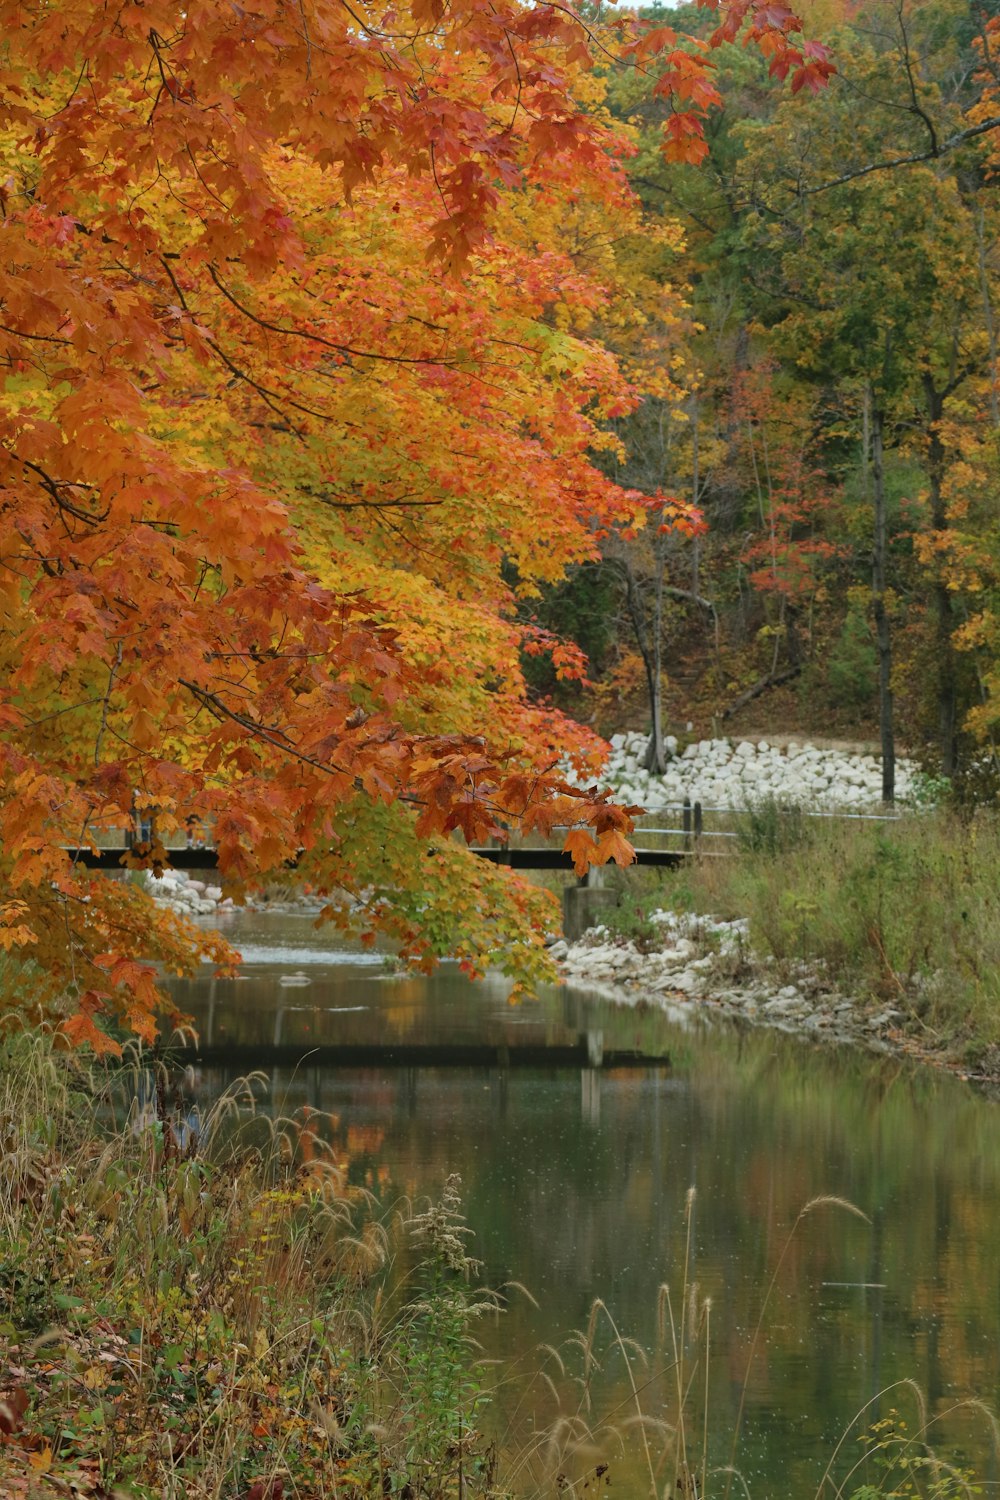 a pond surrounded by trees with orange and yellow leaves